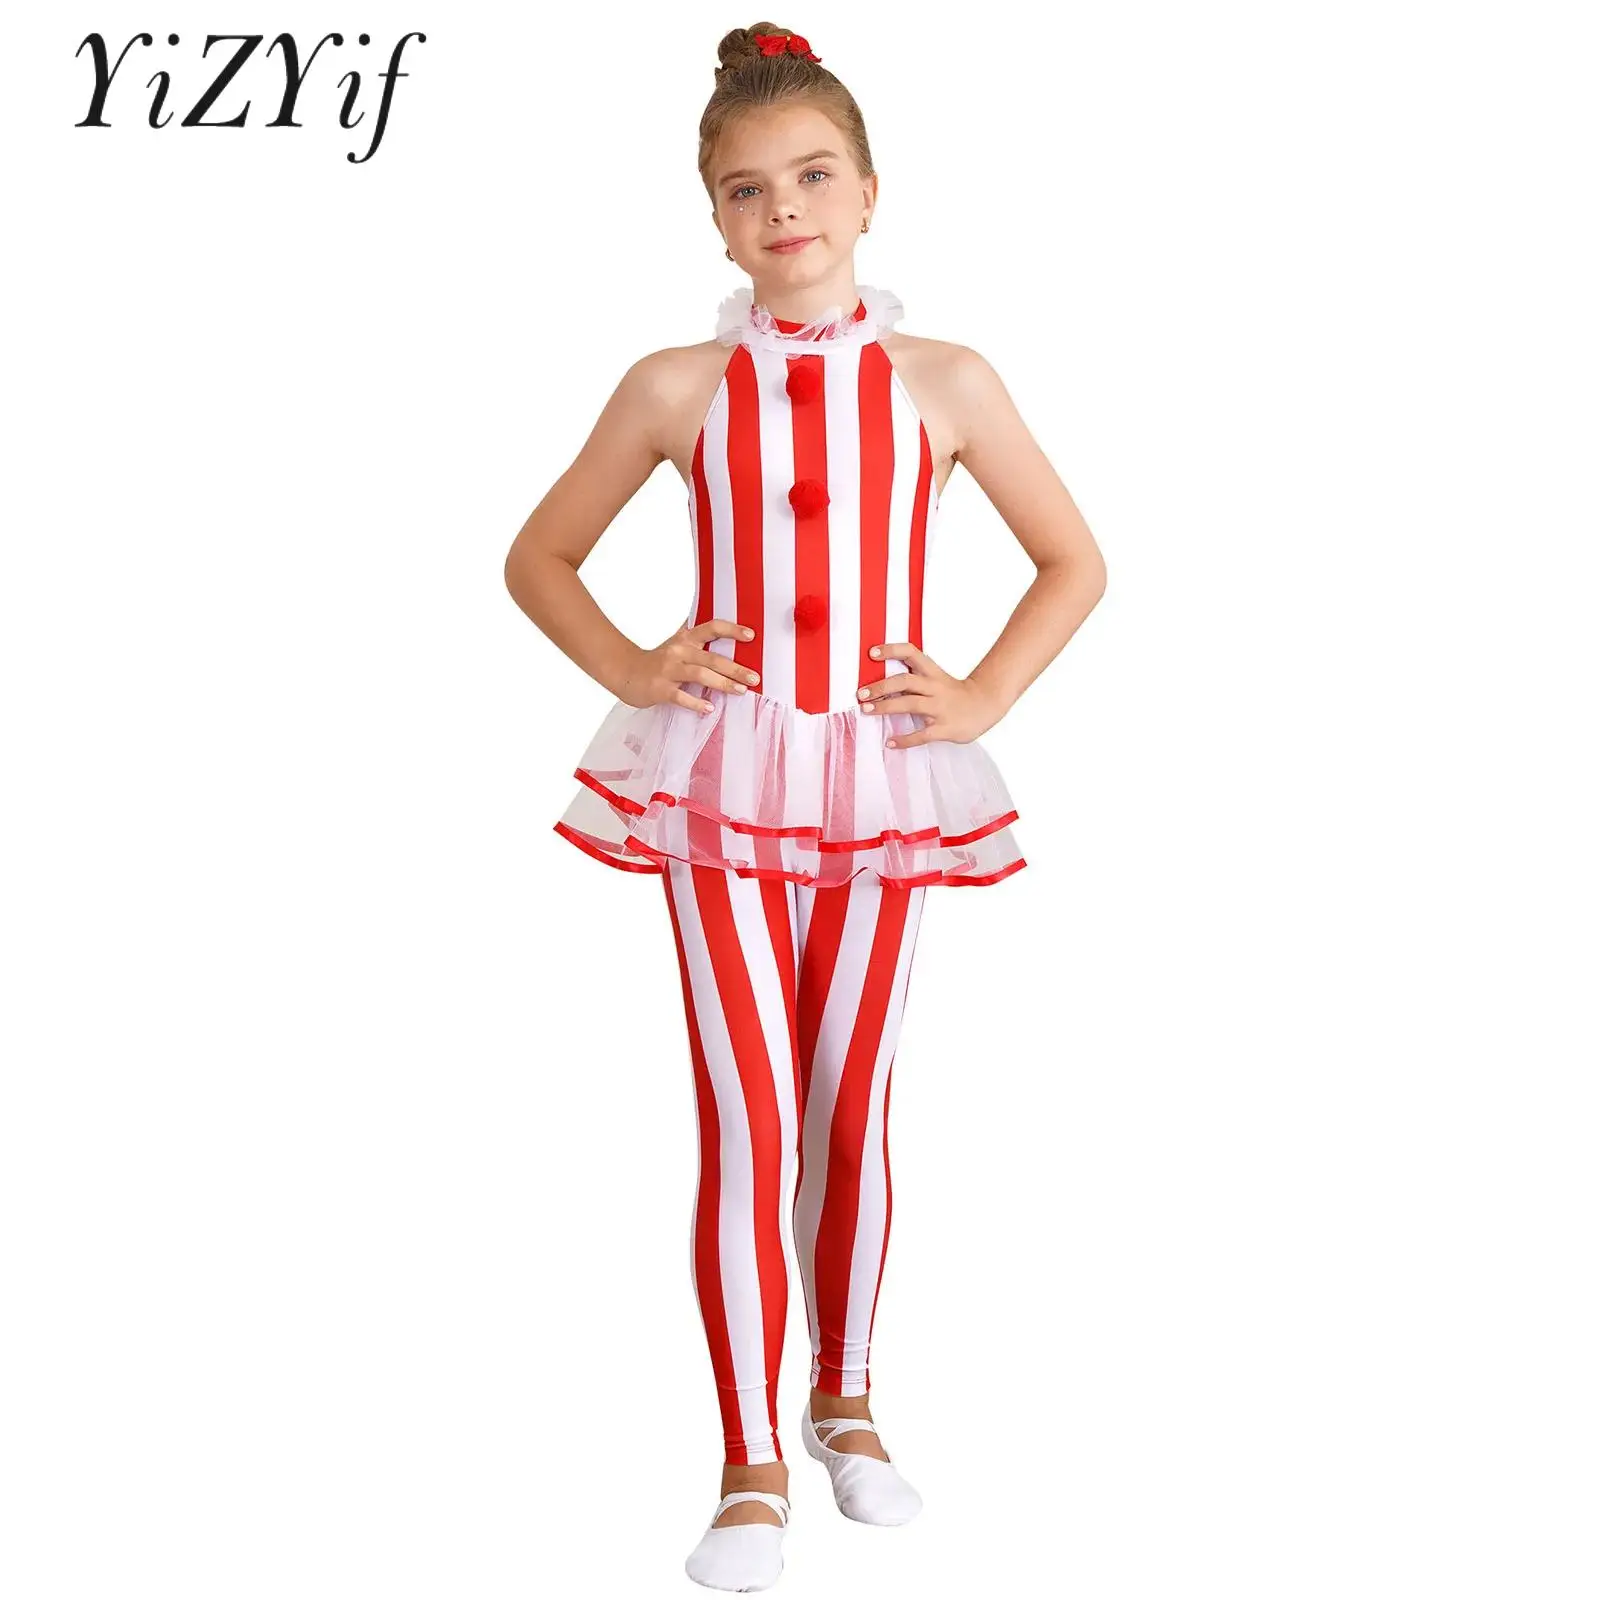 

Girls Christmas Candy Cane Print Jumpsuit Santa Claus Costume Halter Neck Long Skirted Unitard Performance Outfit Party Dress-Up